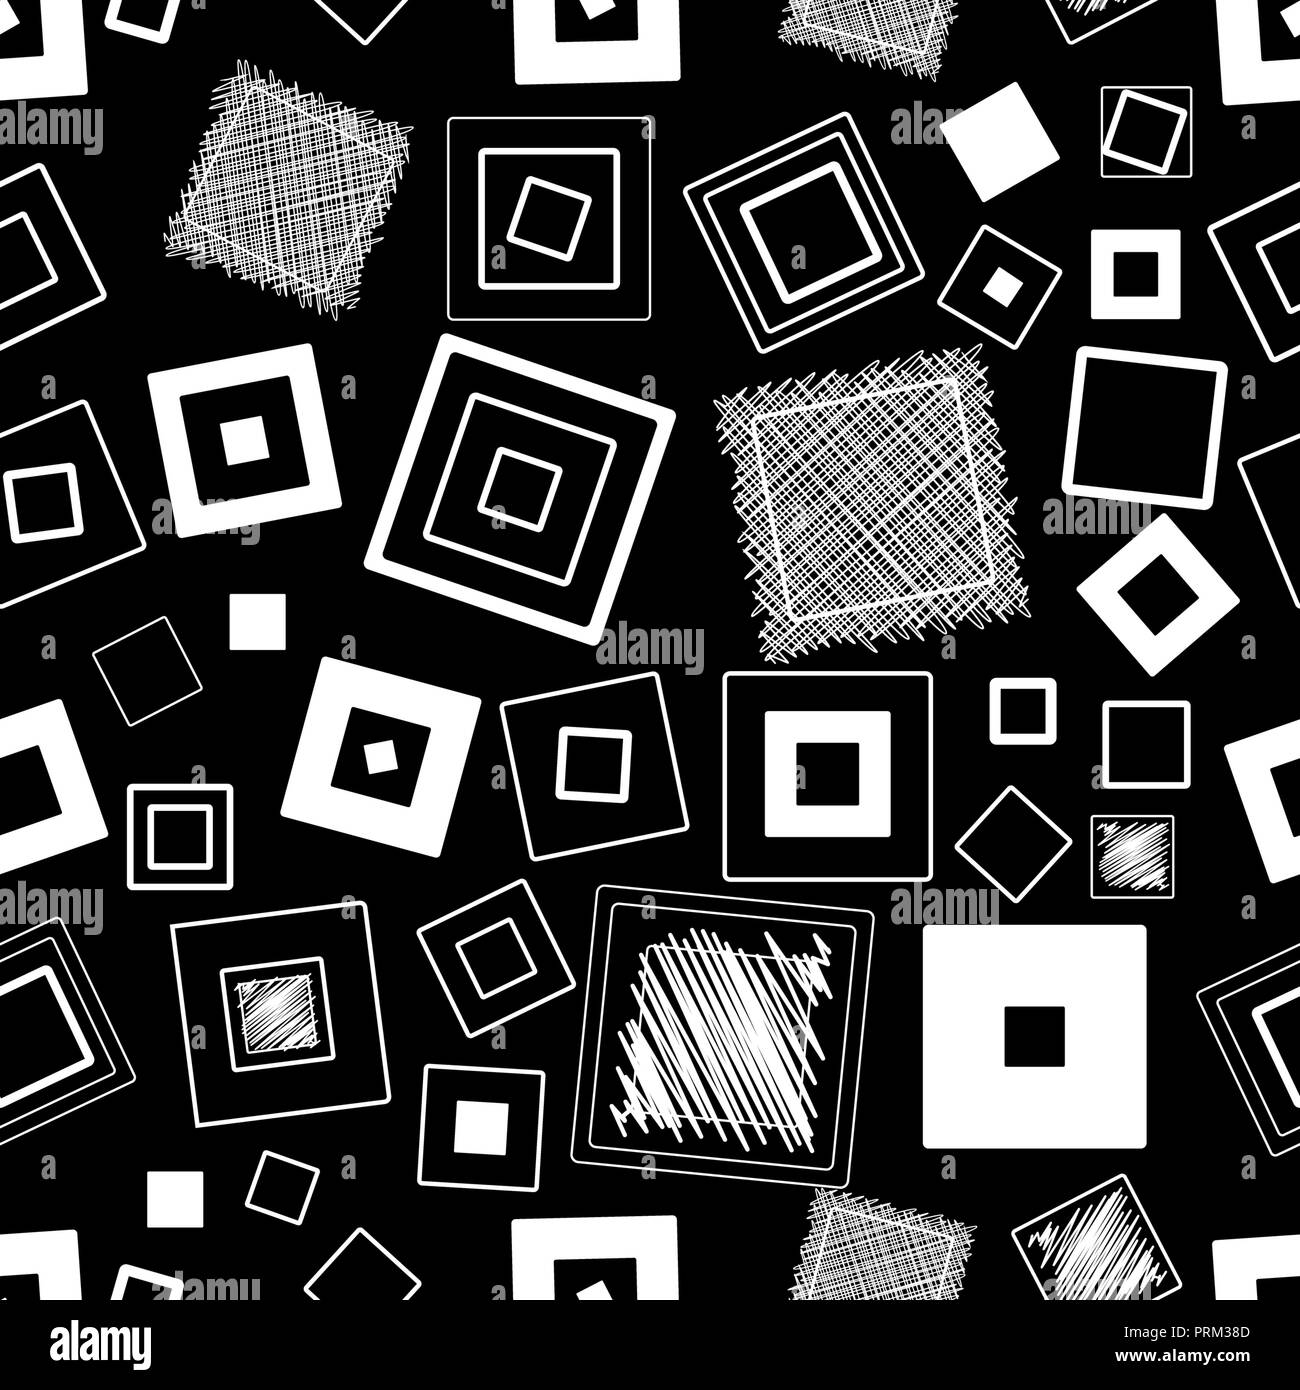 Seamless vector pattern. Squares and scribbles. Black and white Stock Photo